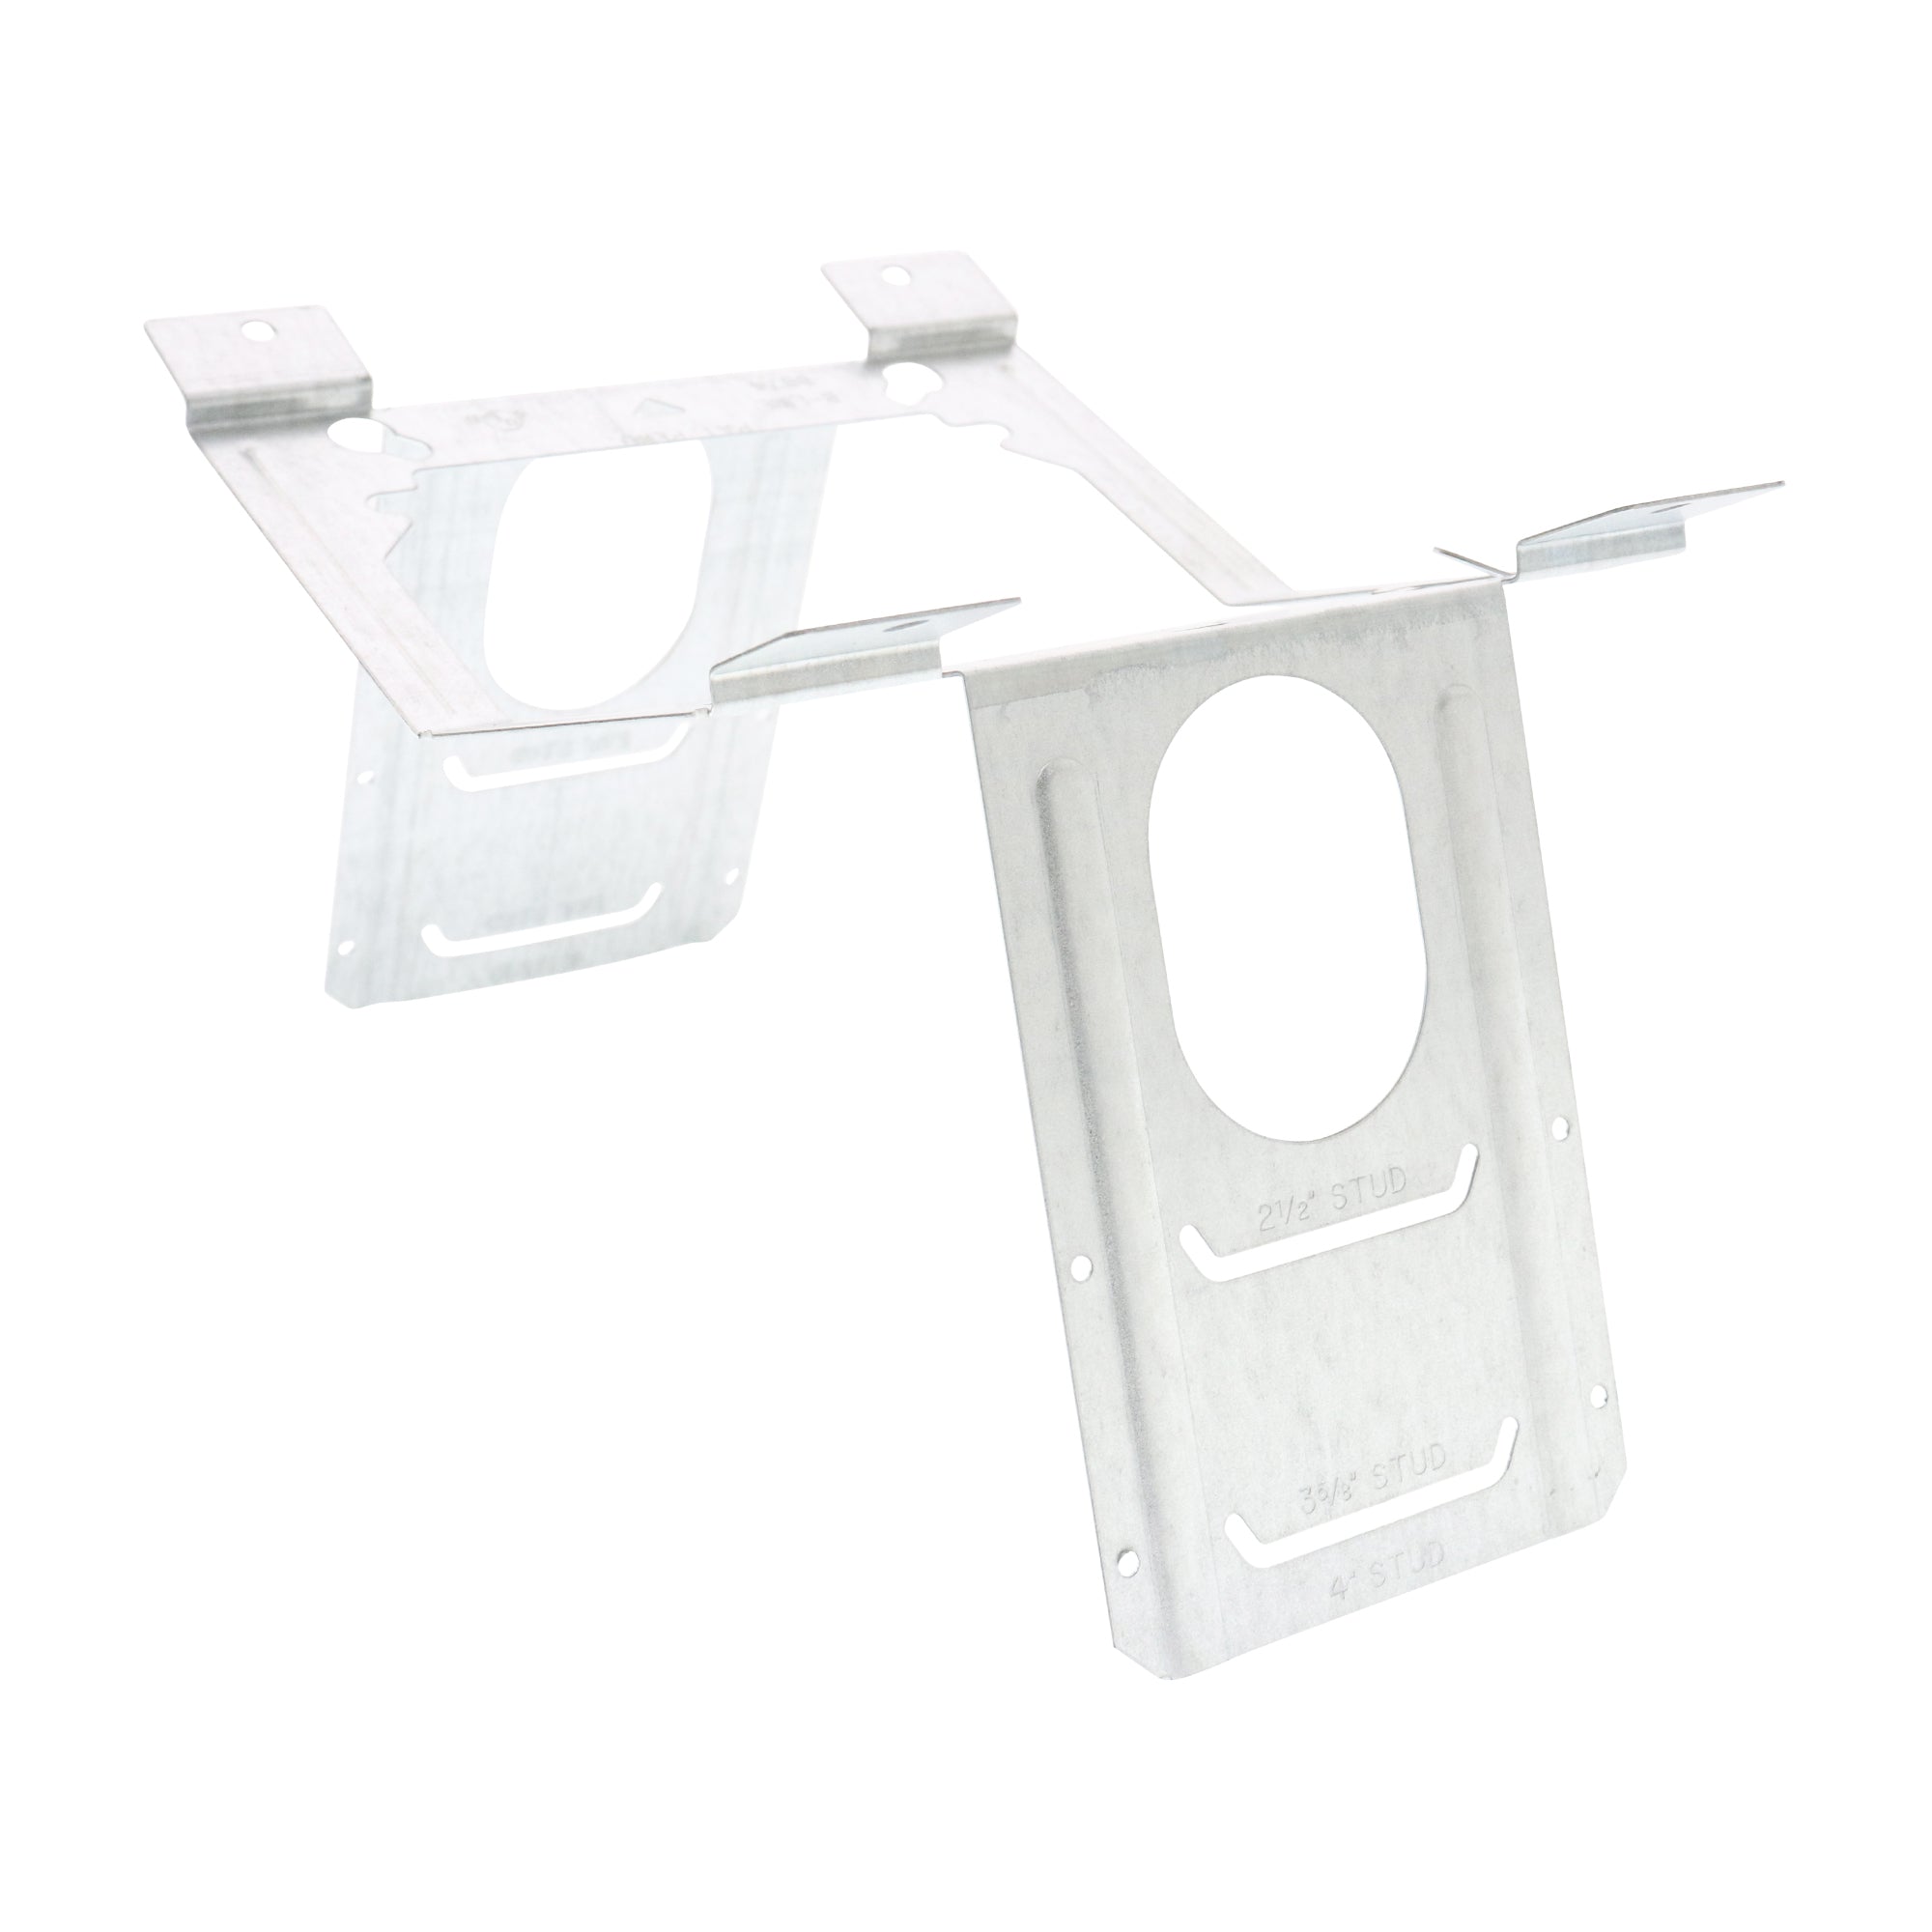 B-Line Systems, COOPER B-LINE BB74 DOUBLE-SIDED DEVICE BOX SUPPORT BRACKET, W/ EARS, (50-PACK)